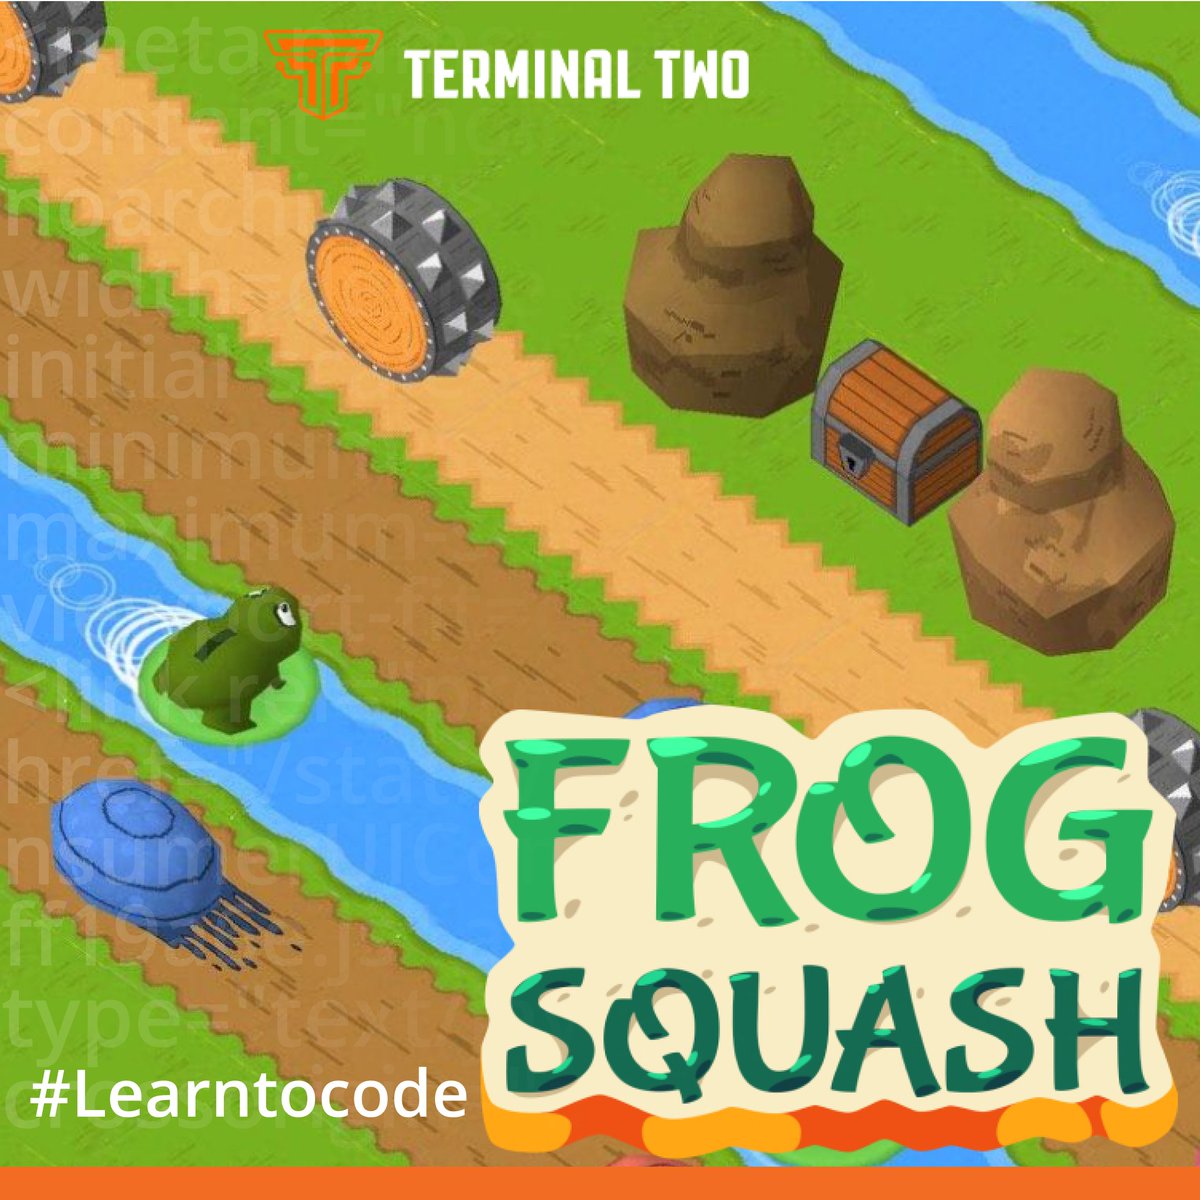 Why did the frog cross the road? Use code to hack the frog and up to eight other animals to get to the other side! 

Play for free at terminaltwo.com

#HourOfCode #HoC #CSed #STEM #parents #teachers #K12 #learntocode #homeschool #wfh #gamesforkids